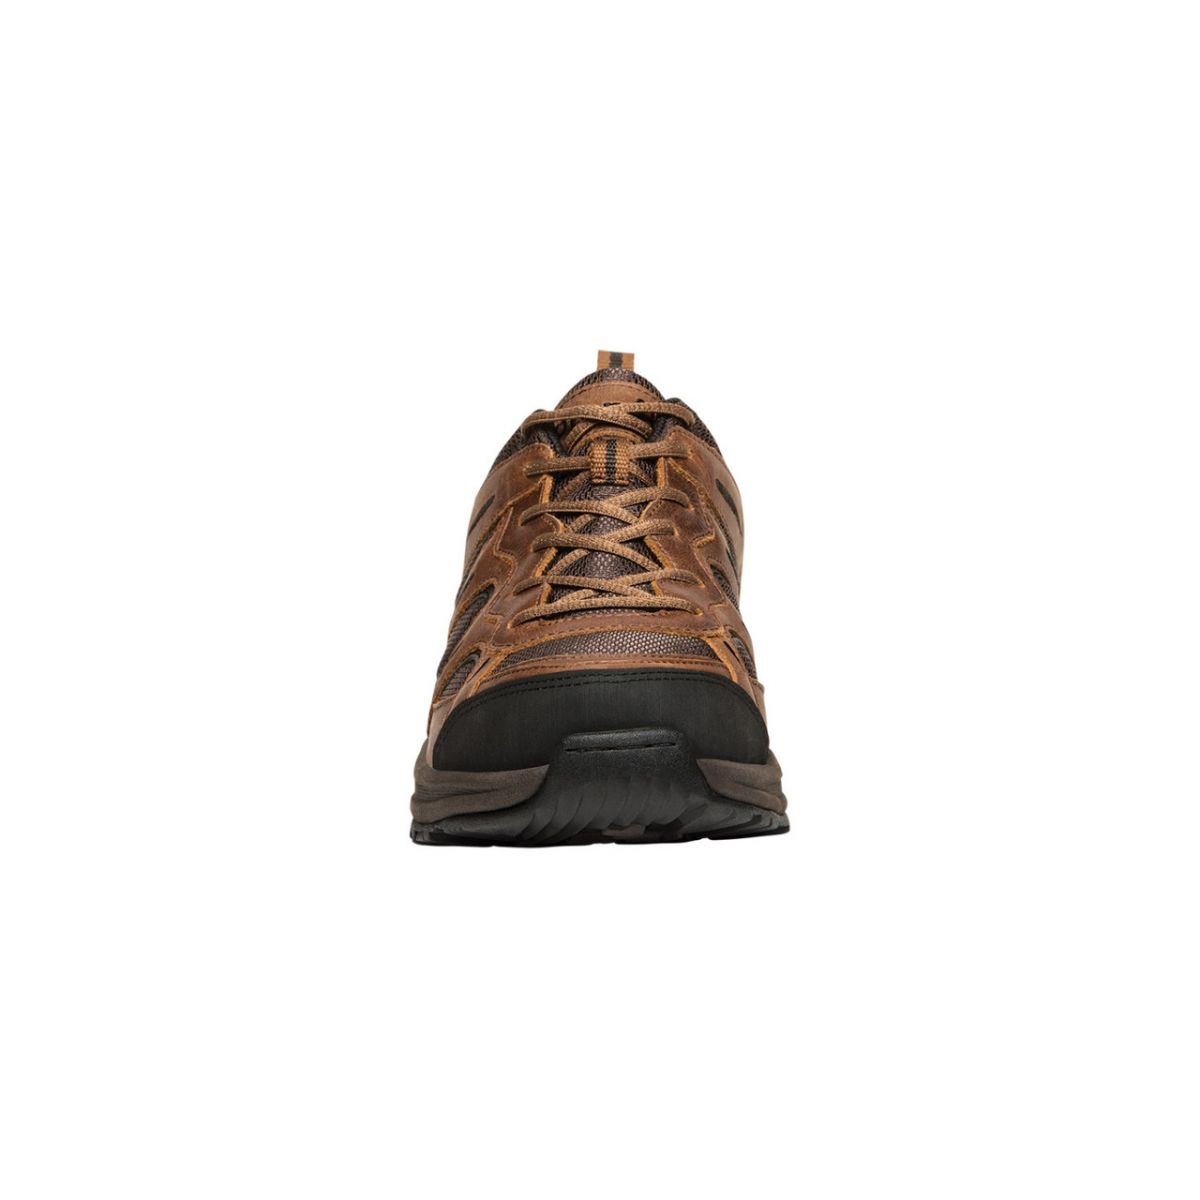 Propet Men's Connelly Hiking Shoe Brown - M5503BR BROWN - BROWN, 9-3E